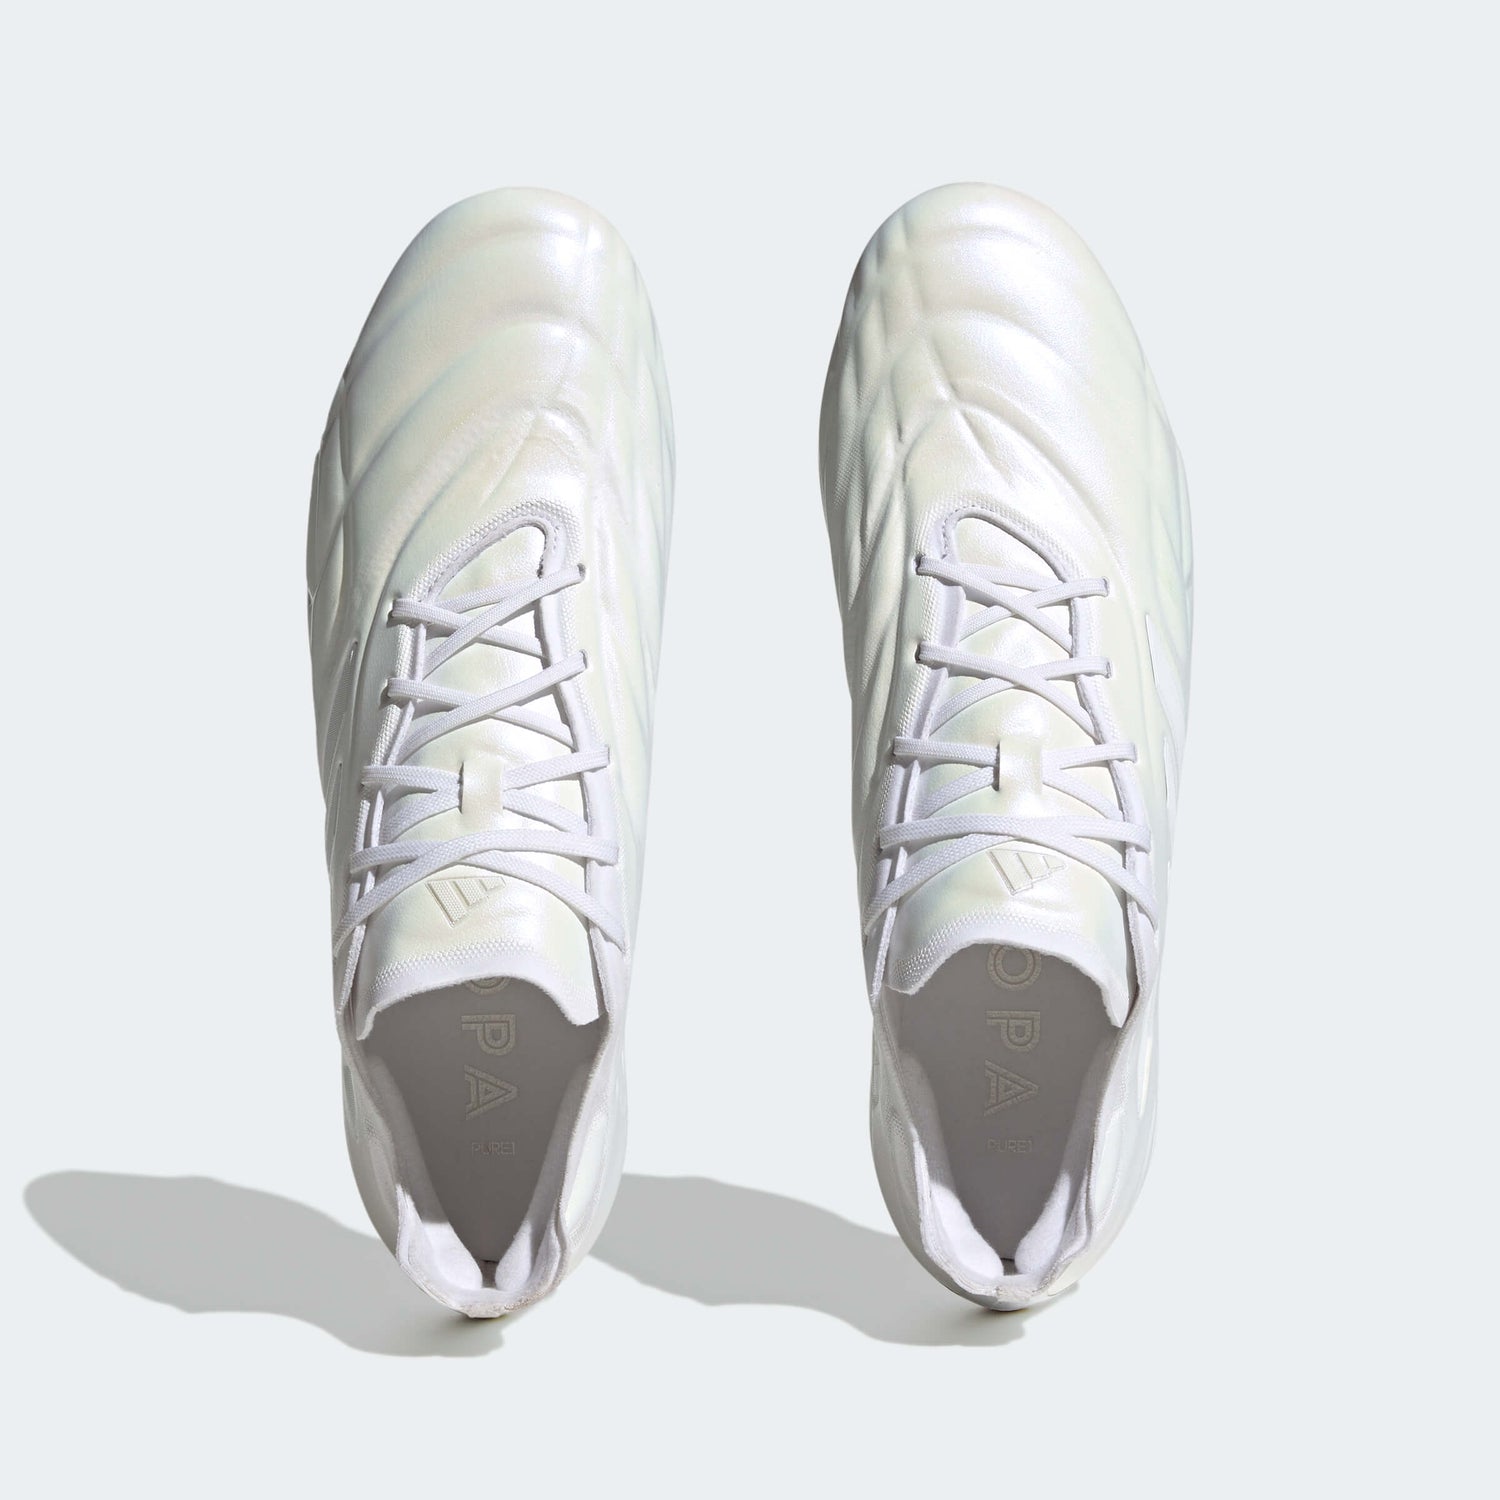 adidas Copa Pure.1 FG -  Pearlized Pack (SP23) (Pair - Top)